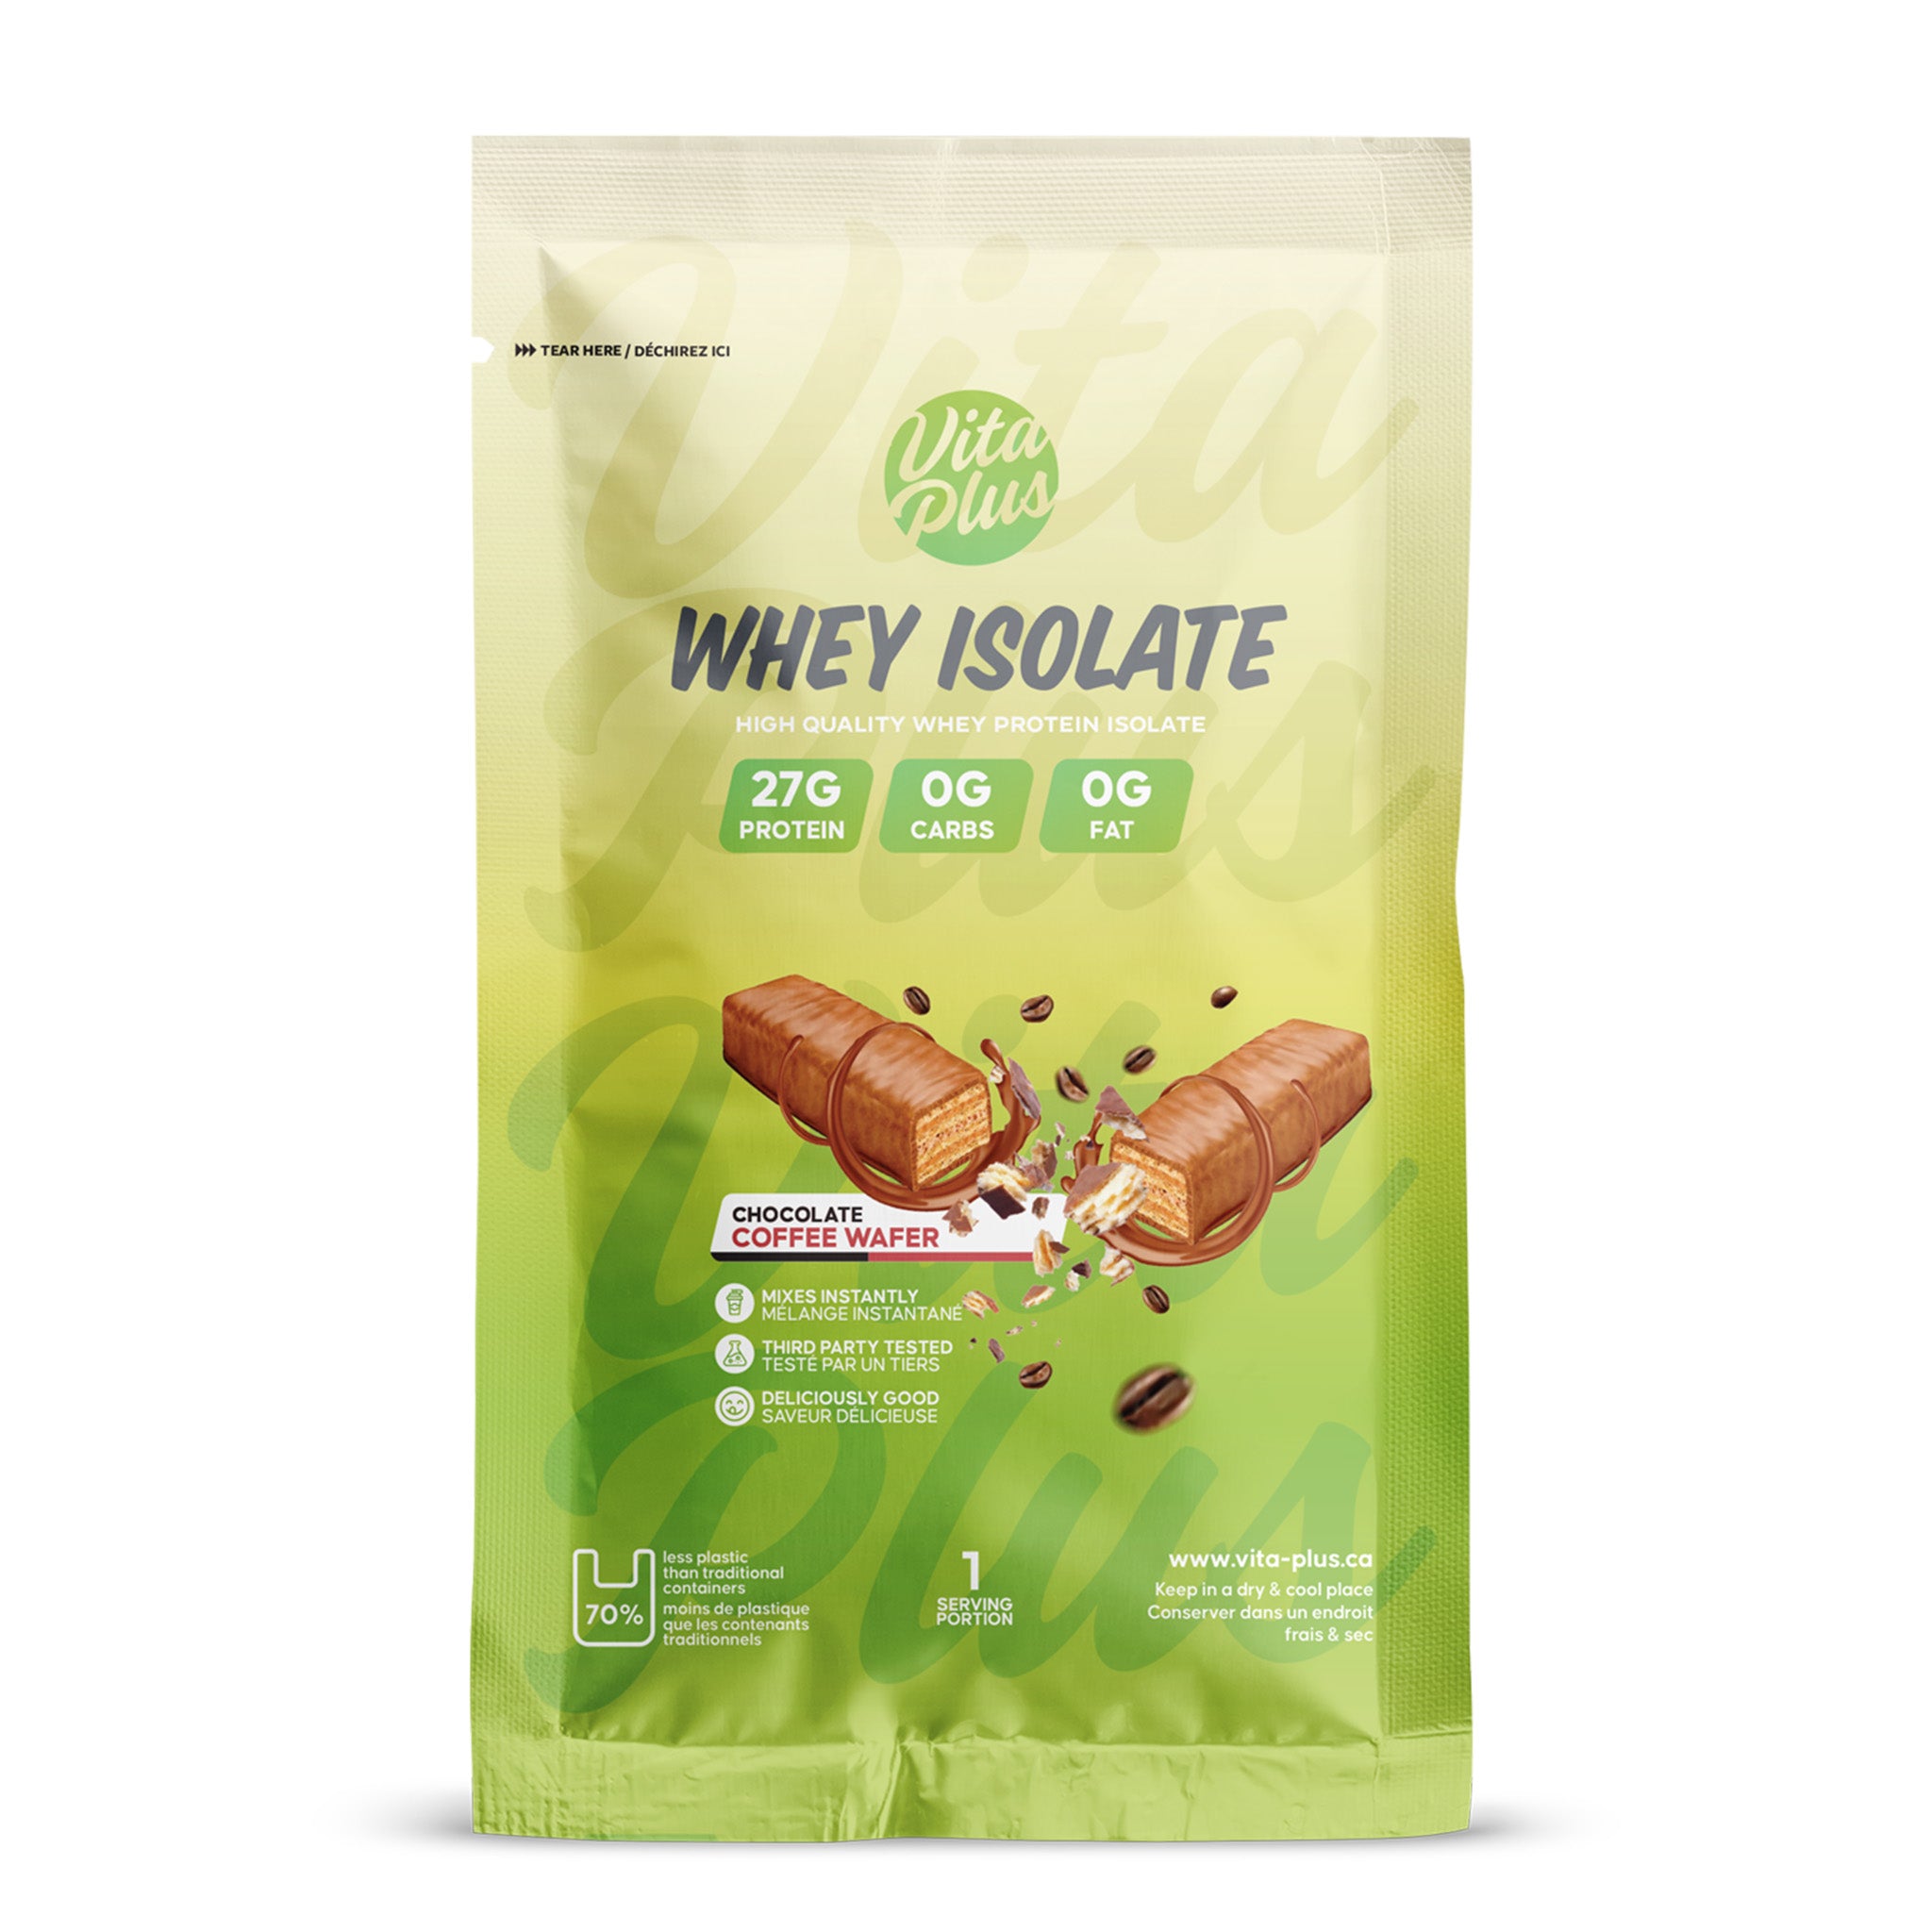 VP Isolate Chocolate Coffee Wafer Sample (1 Unit)